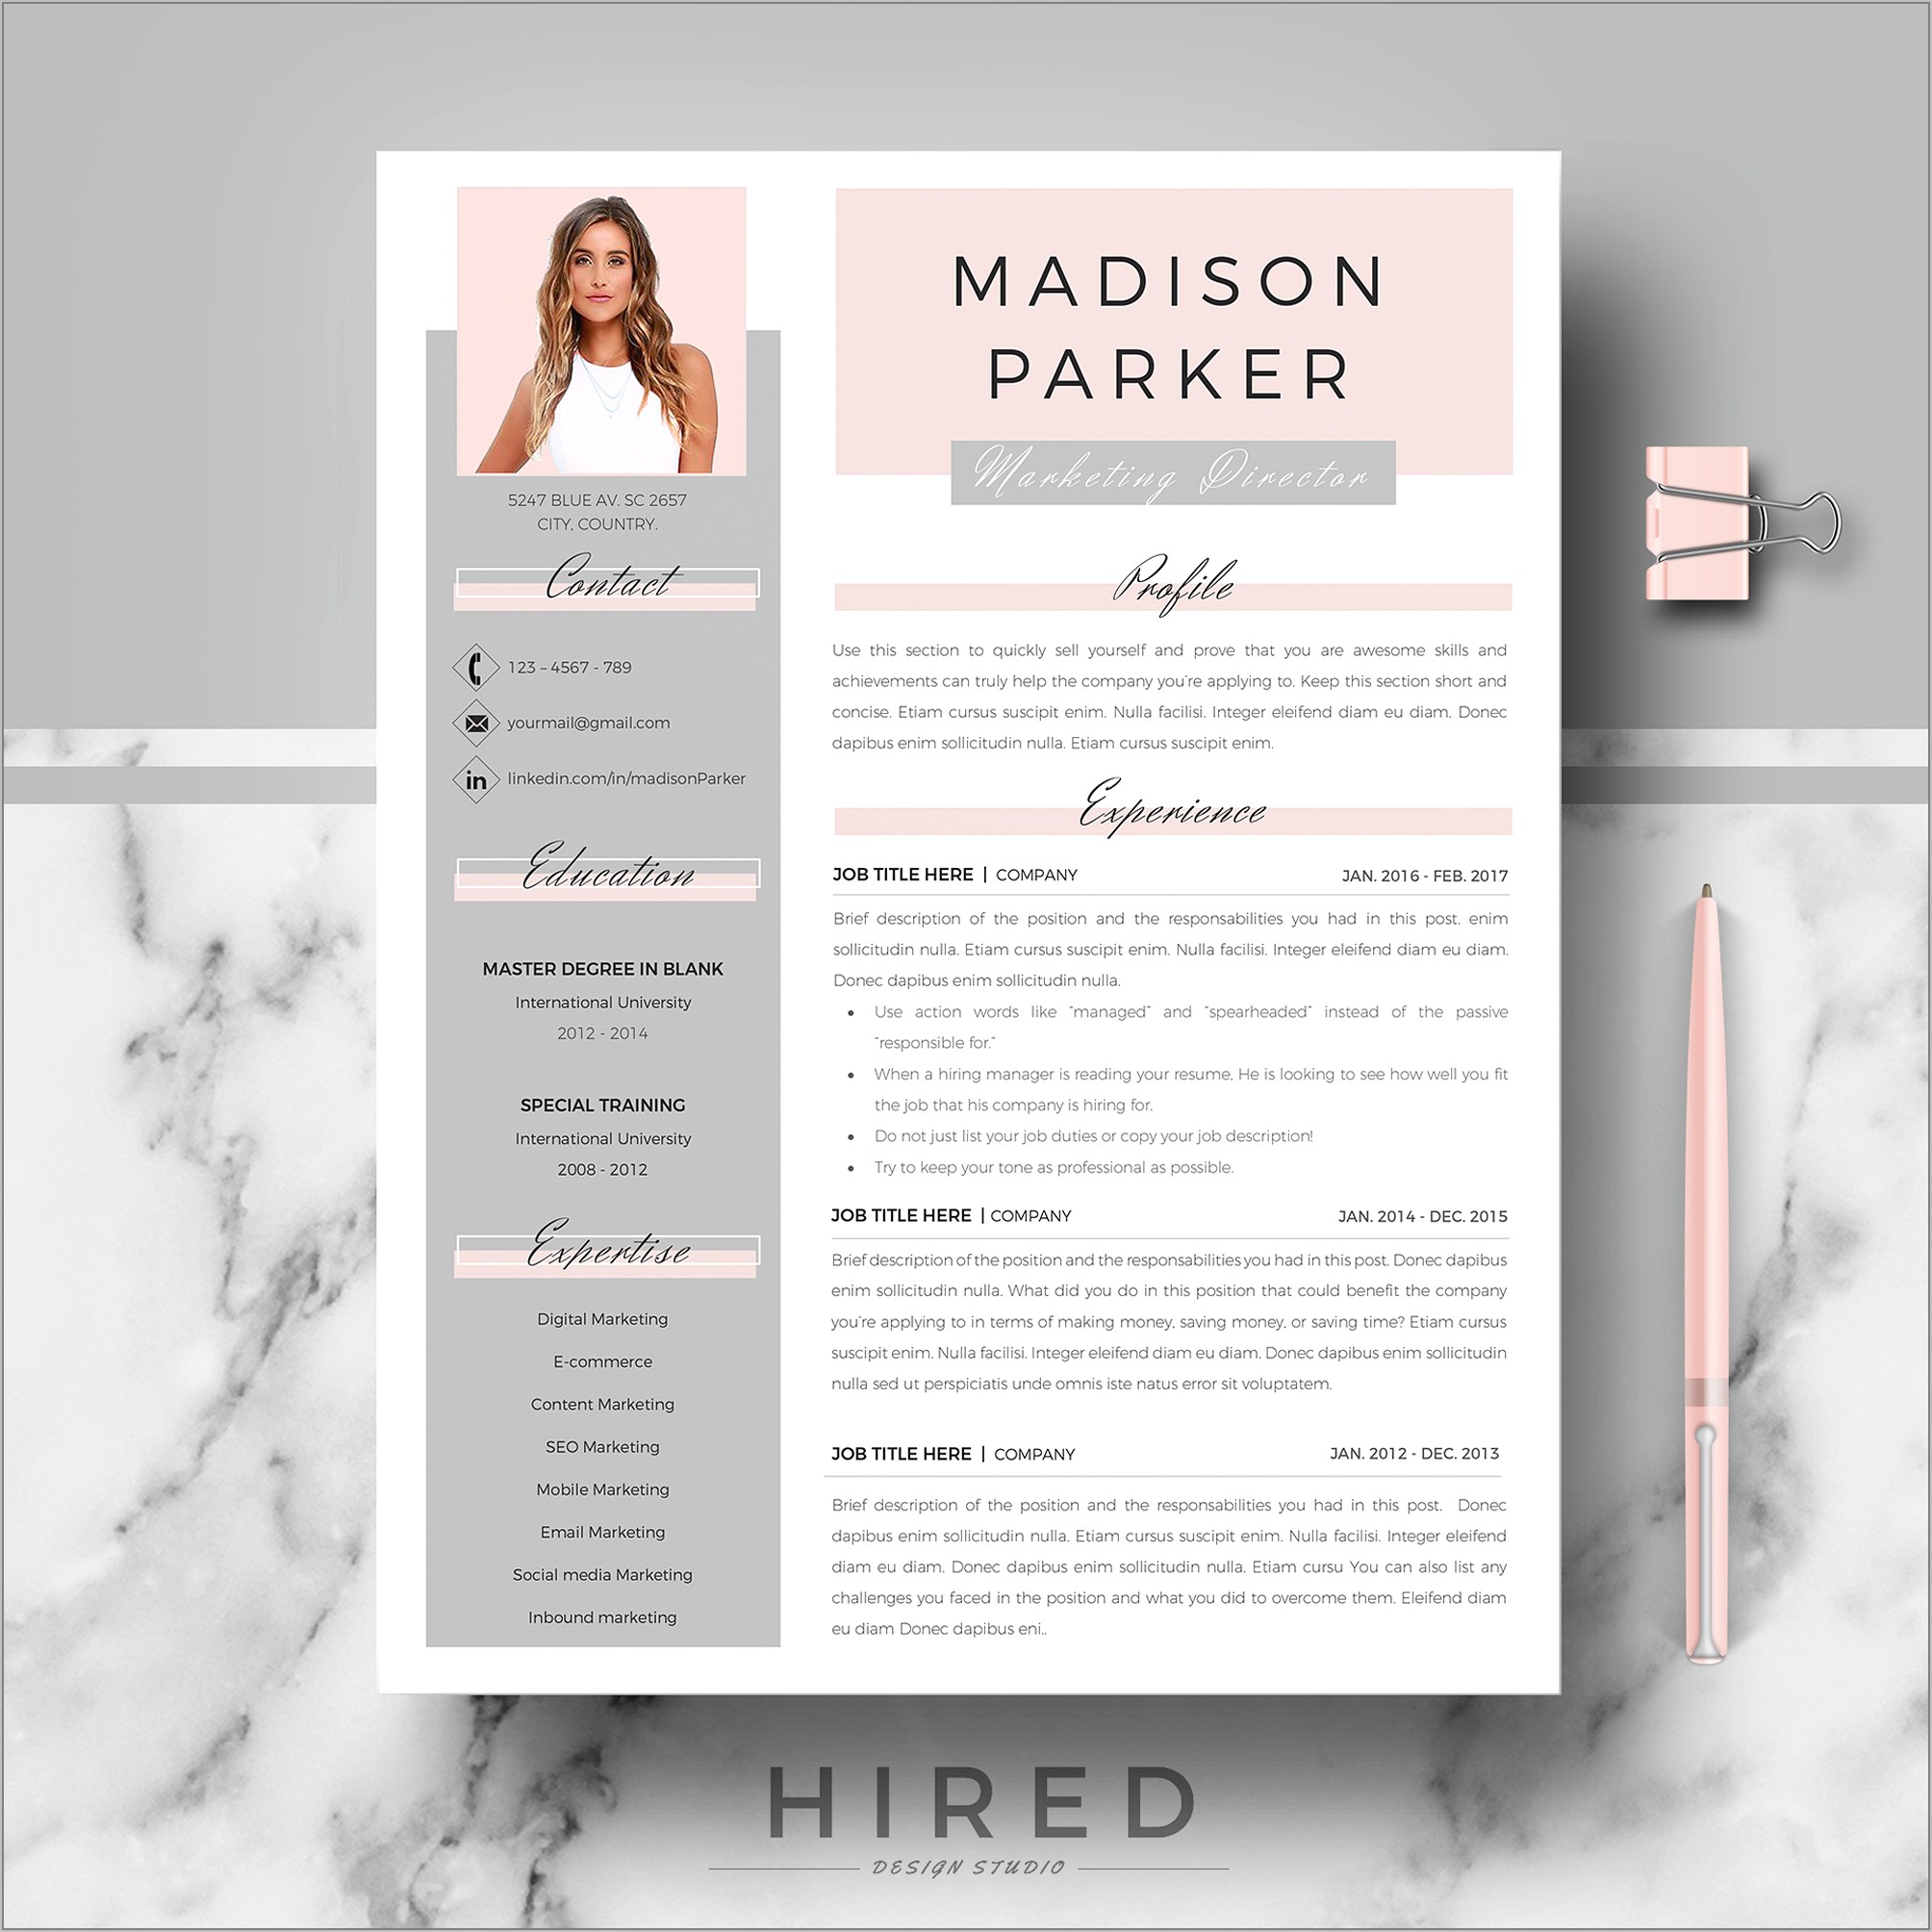 Free Certified Nursing Assistant Resume Template